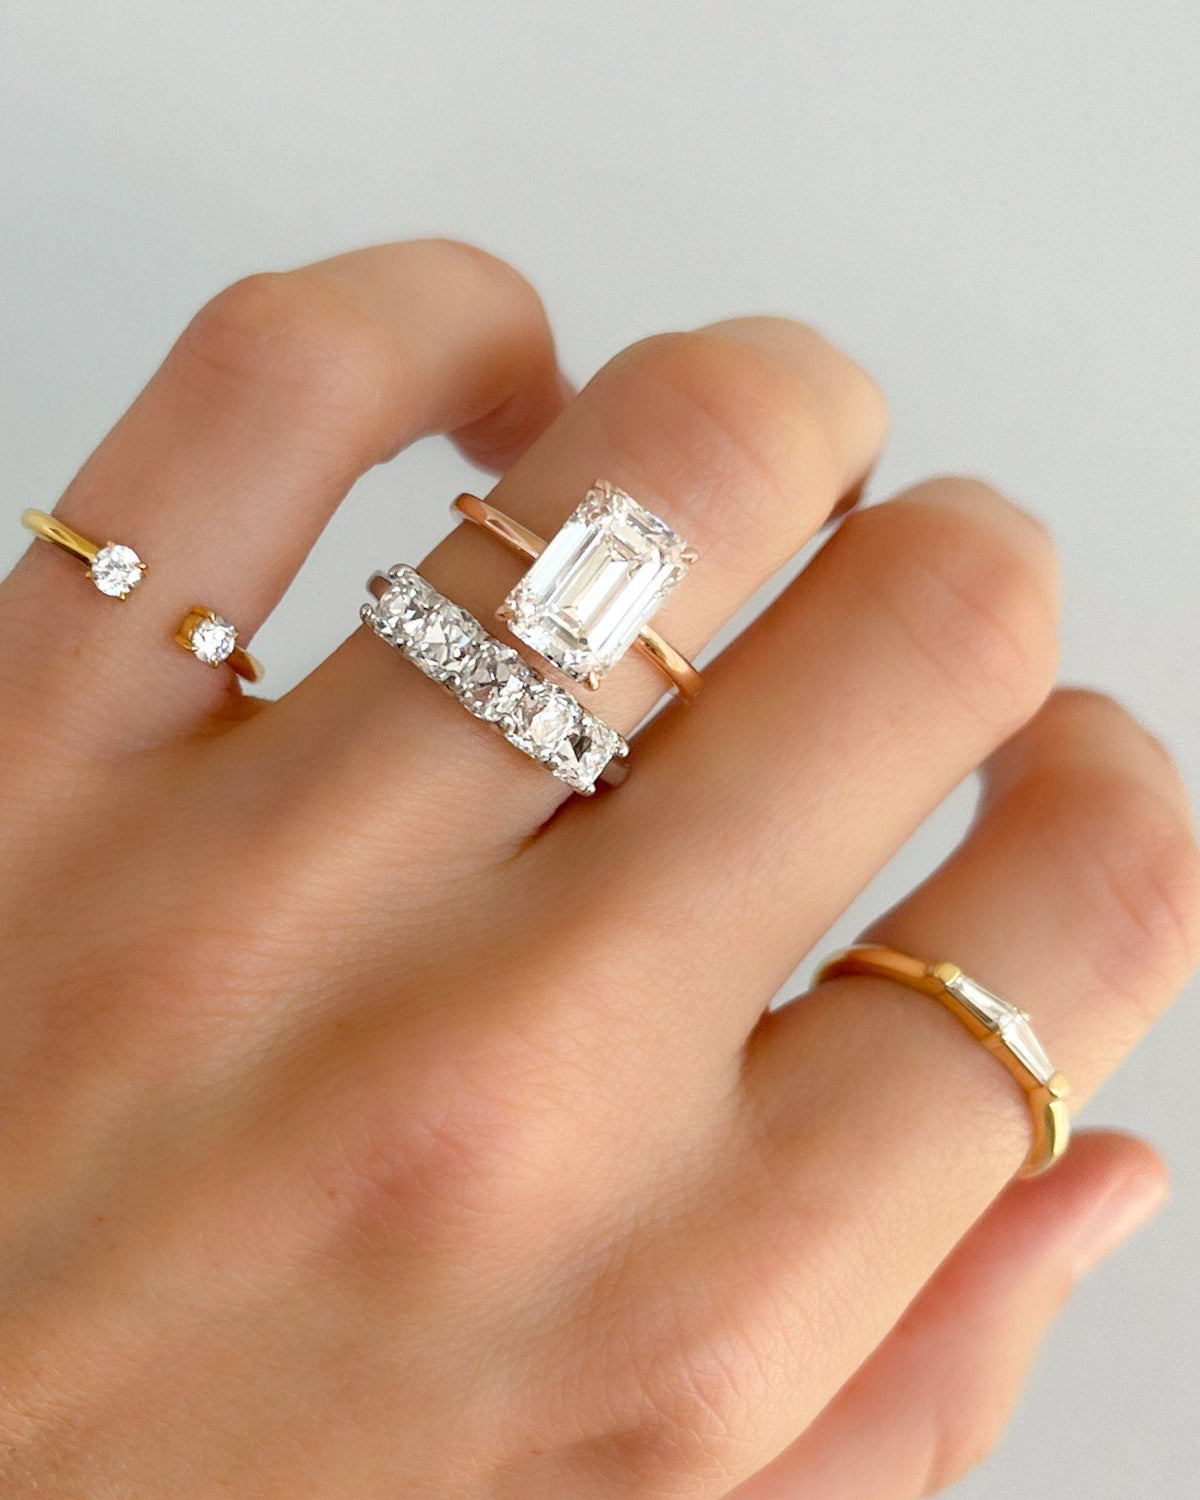 Highlight Claw Diamond Band: Negative Space Ring by Good Stone available in Gold and Platinum